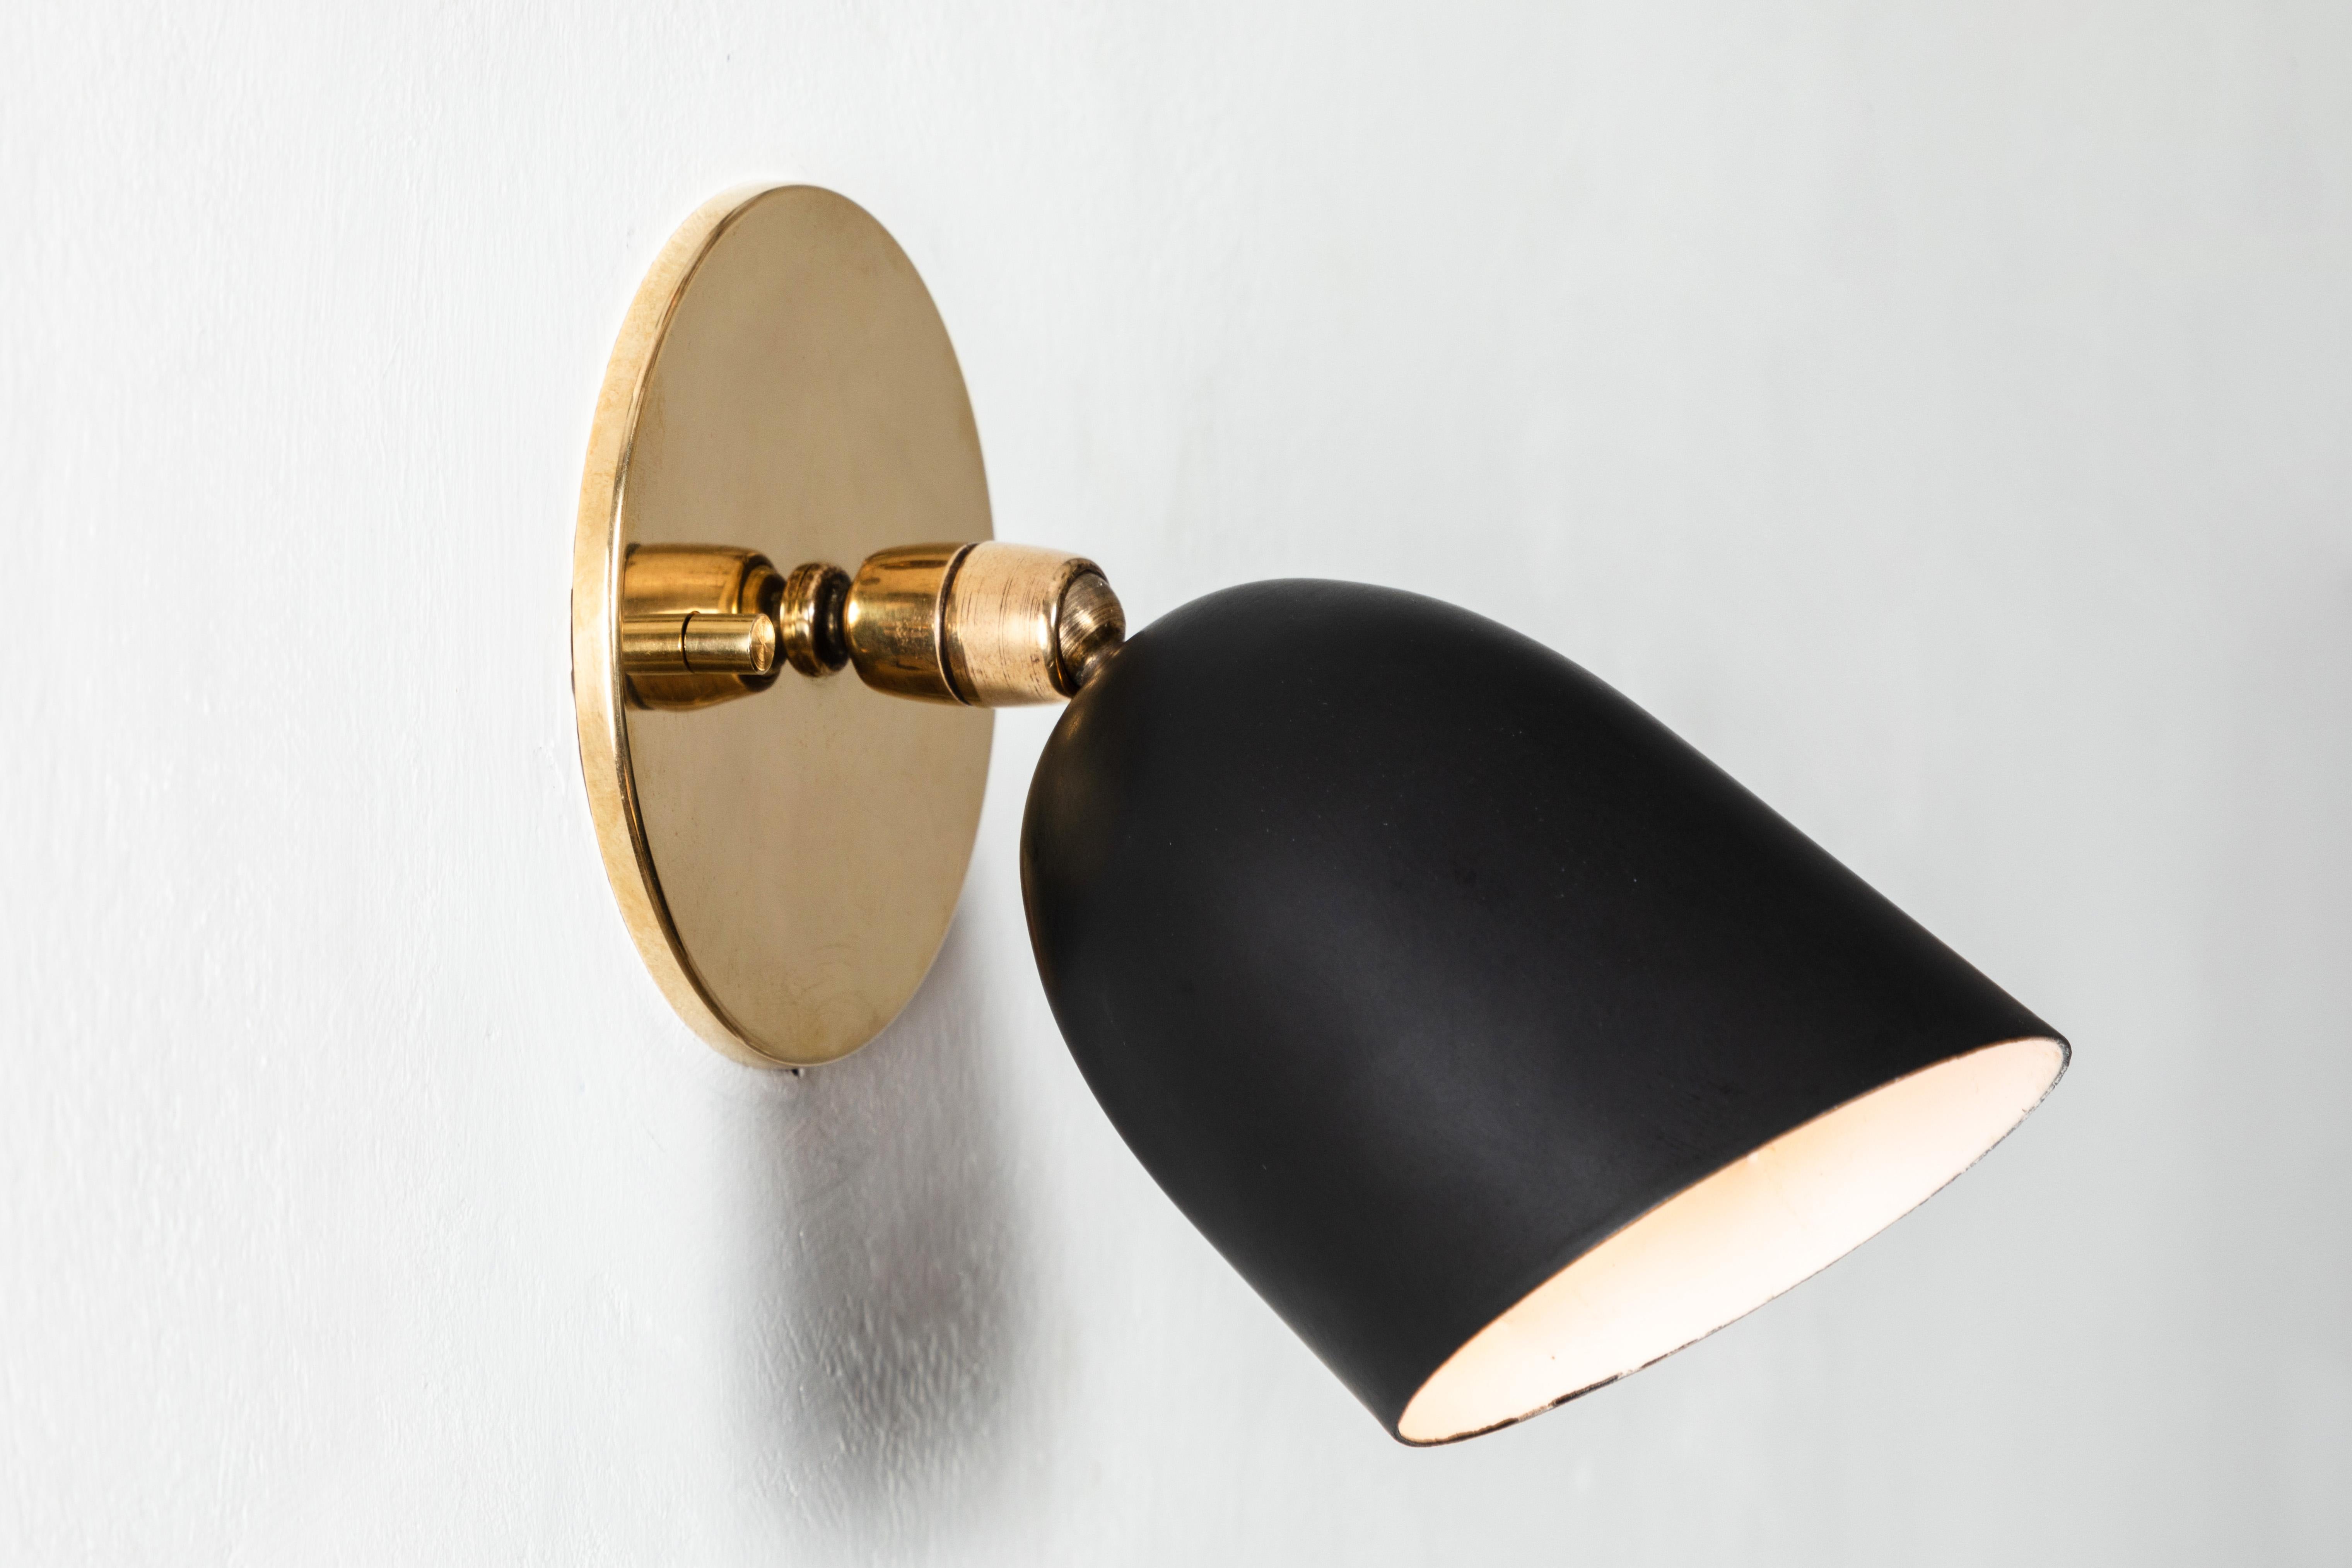 Pair of 1950s petite black sconces by Gino Sarfatti for Arteluce. Executed in black painted aluminum and brass. Double ball jointed arm allows flexible shade adjustments and multiple configurations. The simplicity of Sarfatti's design and the